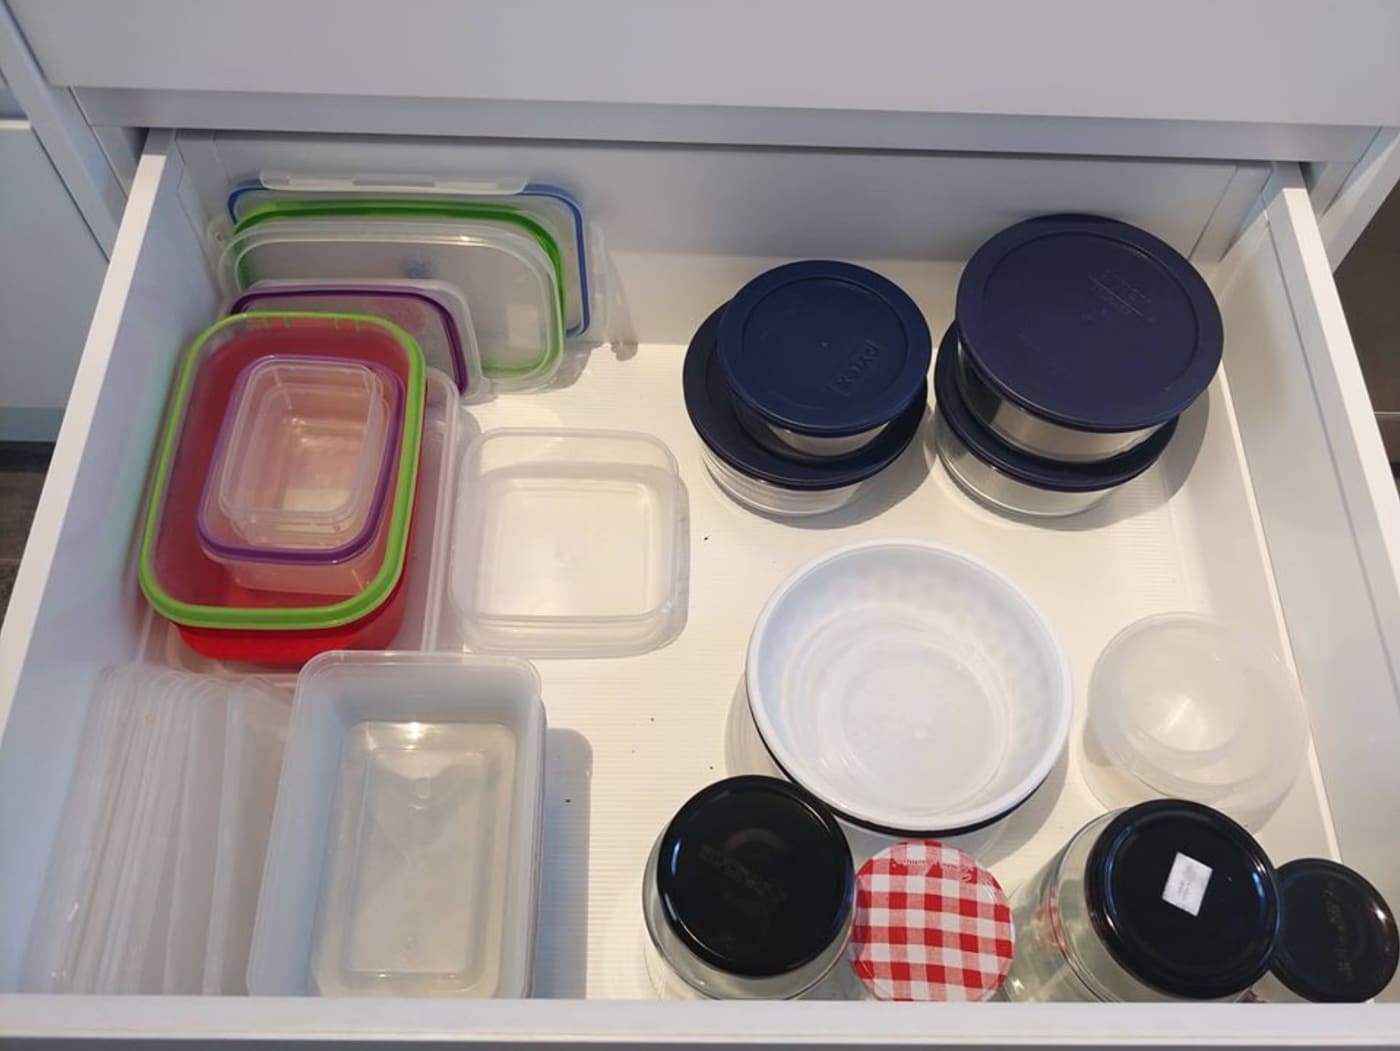 Plastic free shop challenge - reusable containers